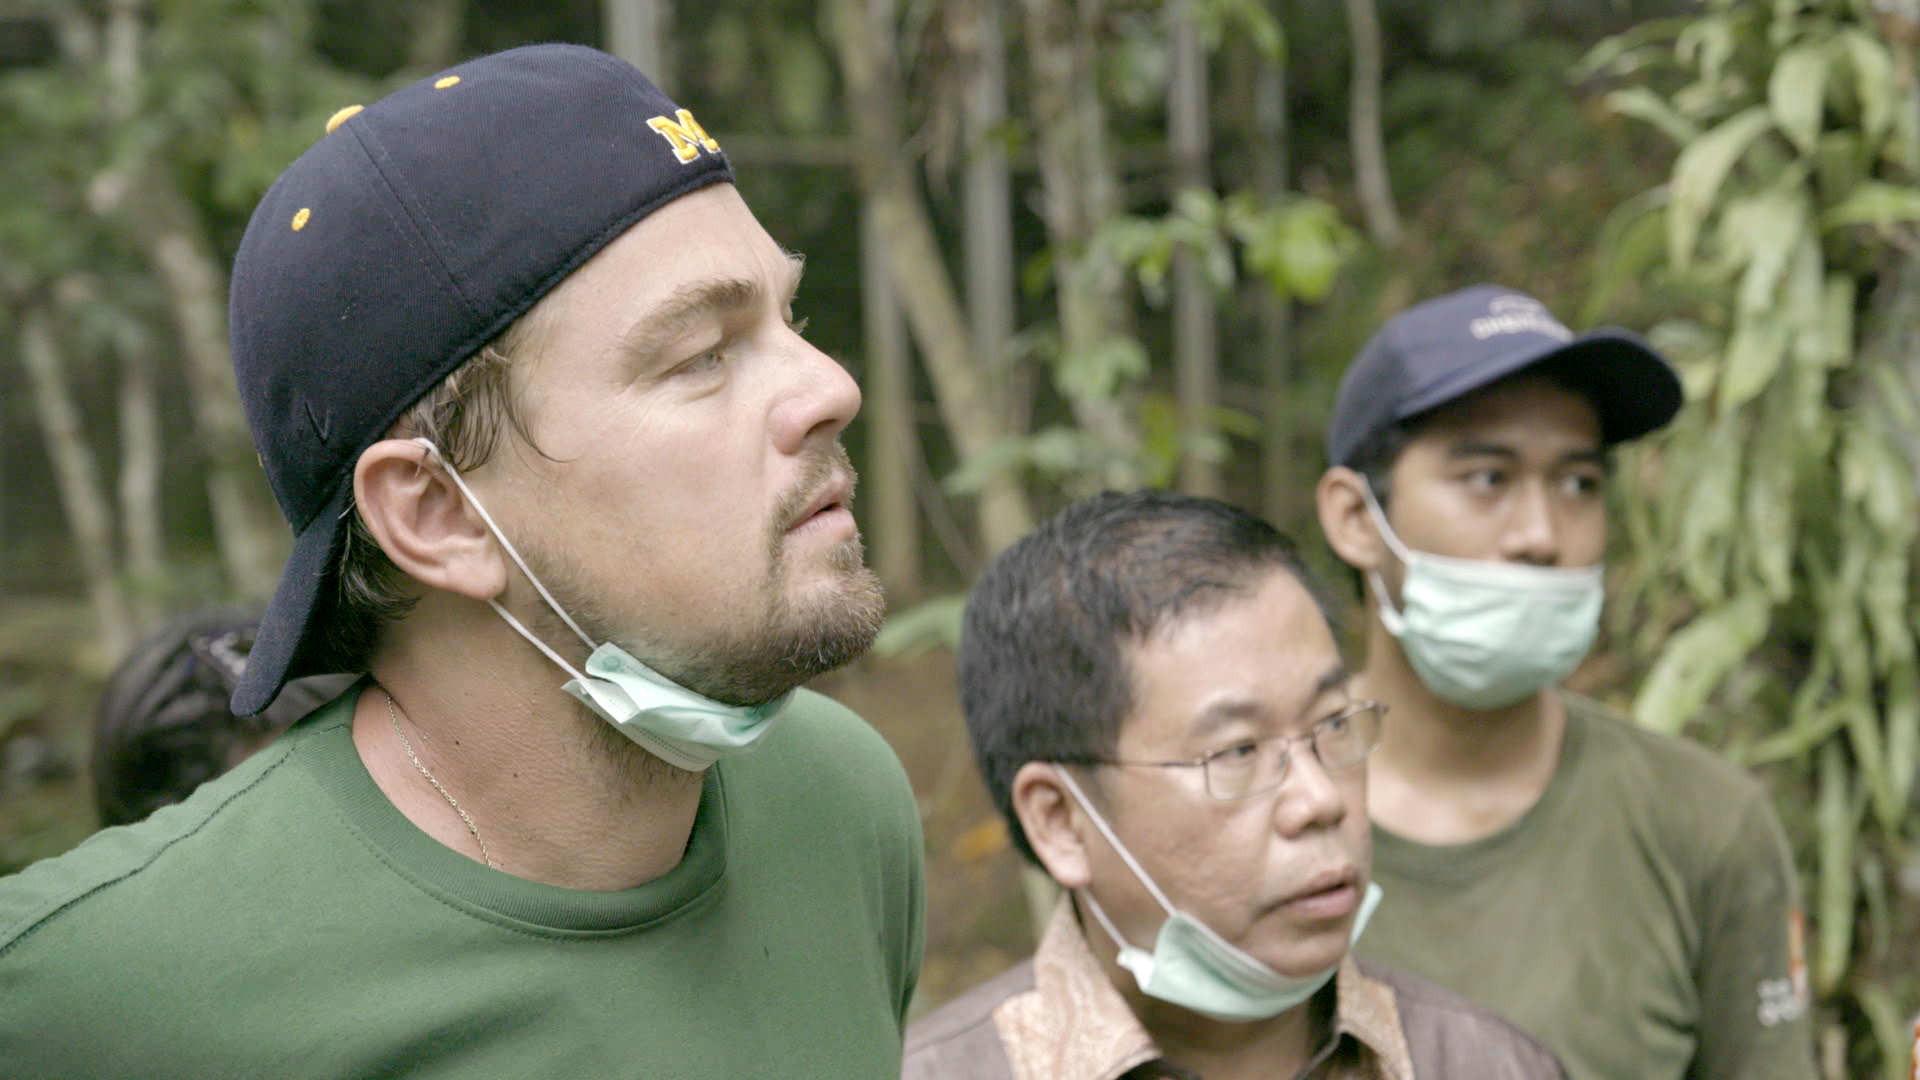 Leonardo DiCaprio Fights Climate Change In “Before The Flood” (Full Documentary)...